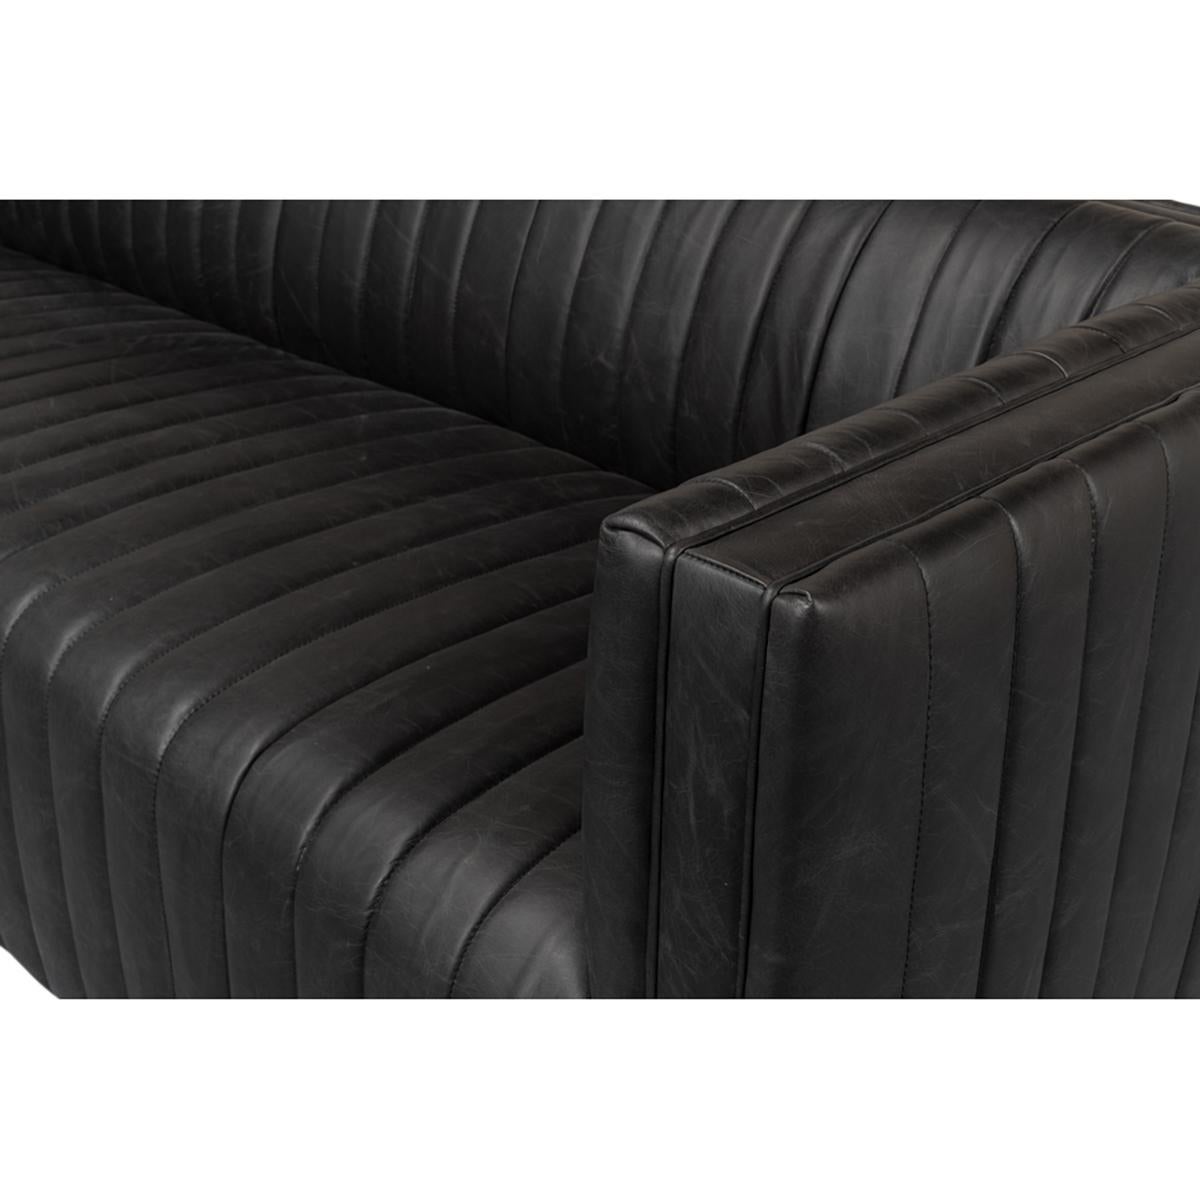 Black Leather Mid Century Sofa In New Condition For Sale In Westwood, NJ